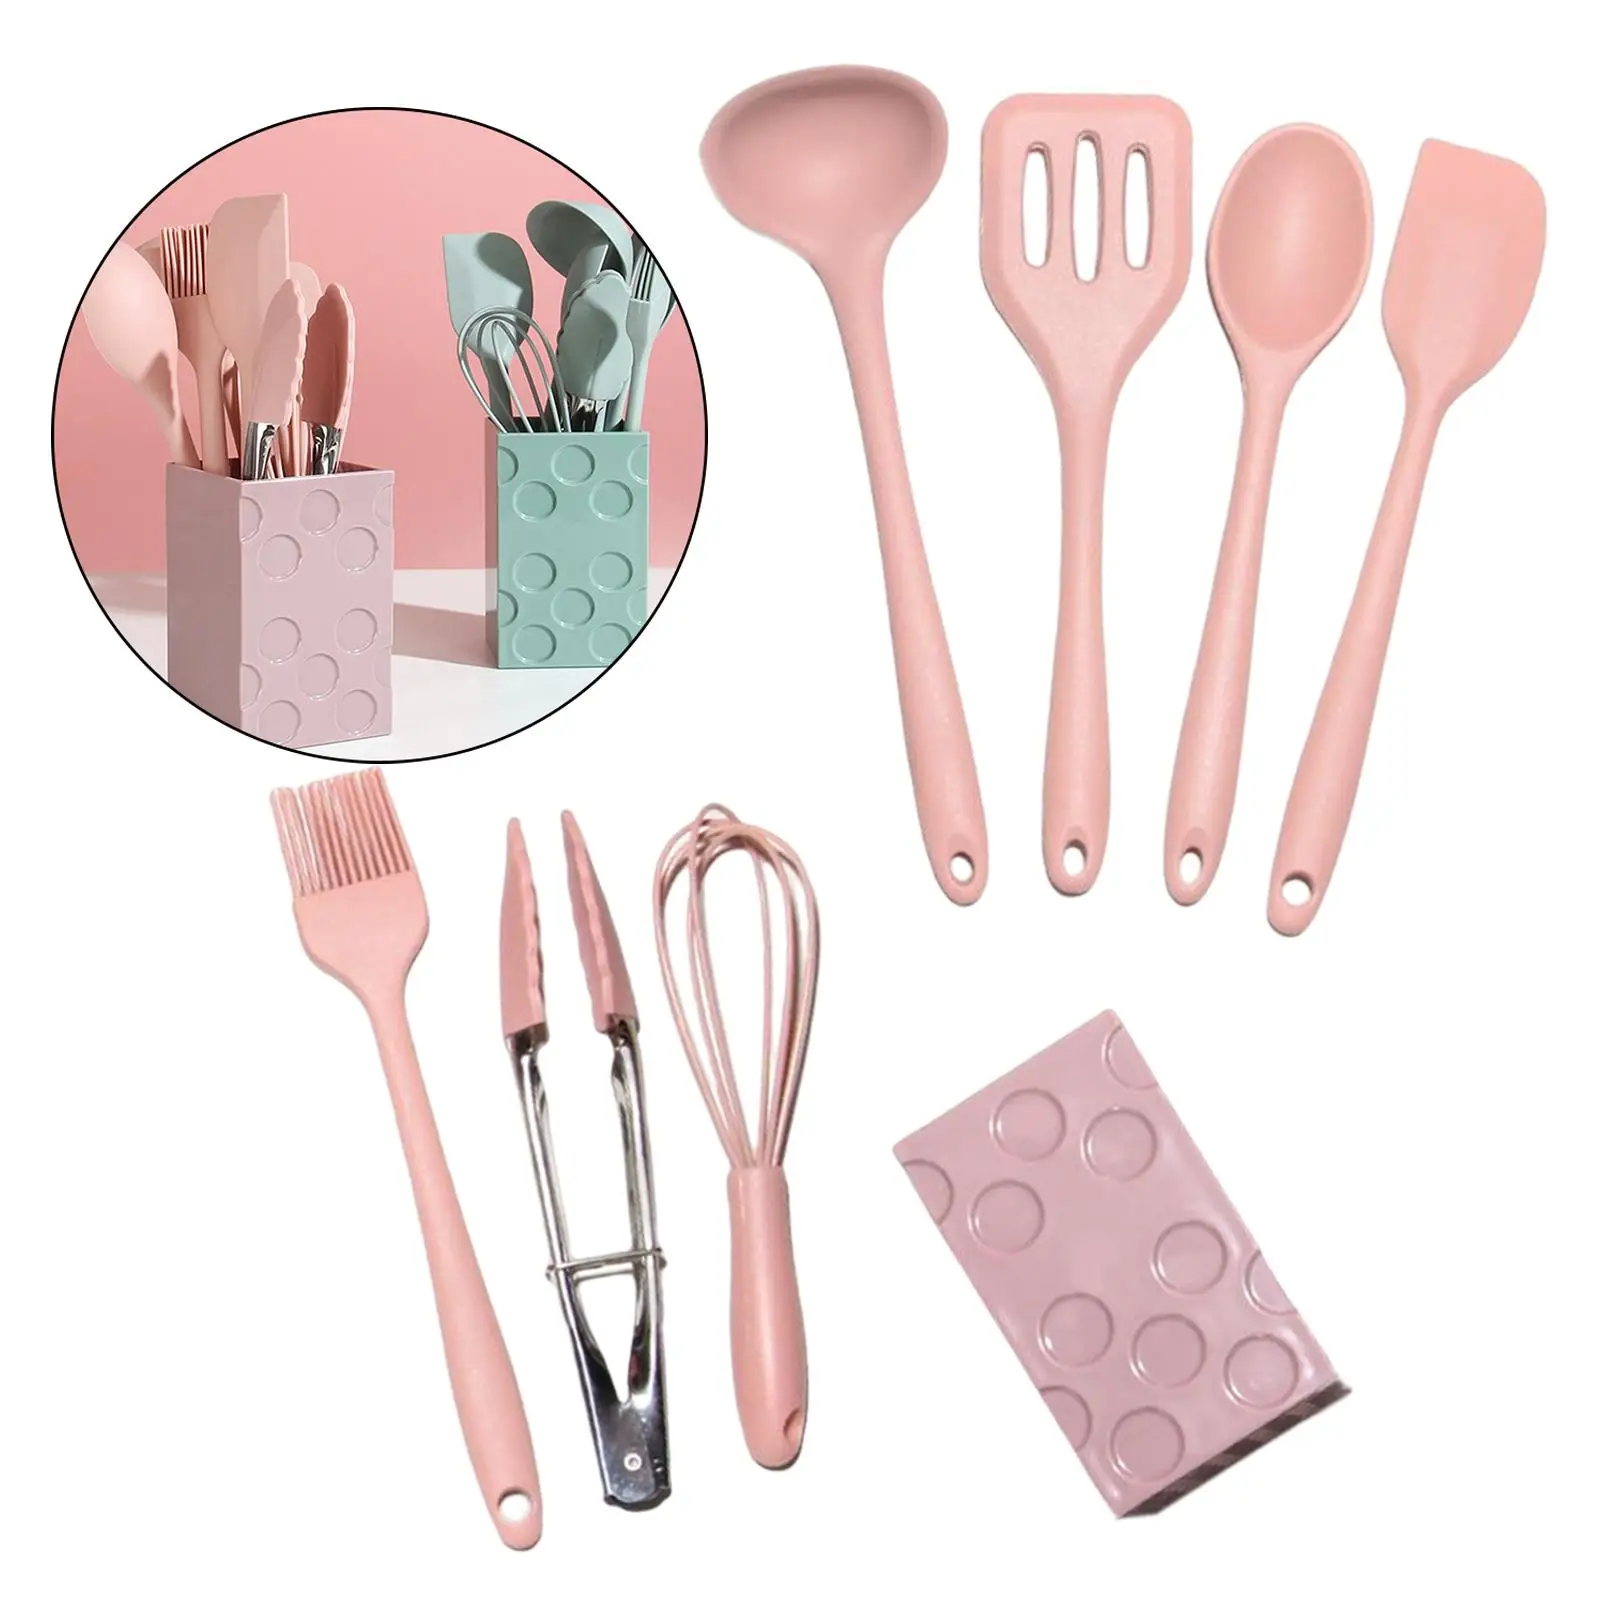 8Pcs Cooking Utensils Set Kitchenware Kitchen Tongs Soup Spoon for Household